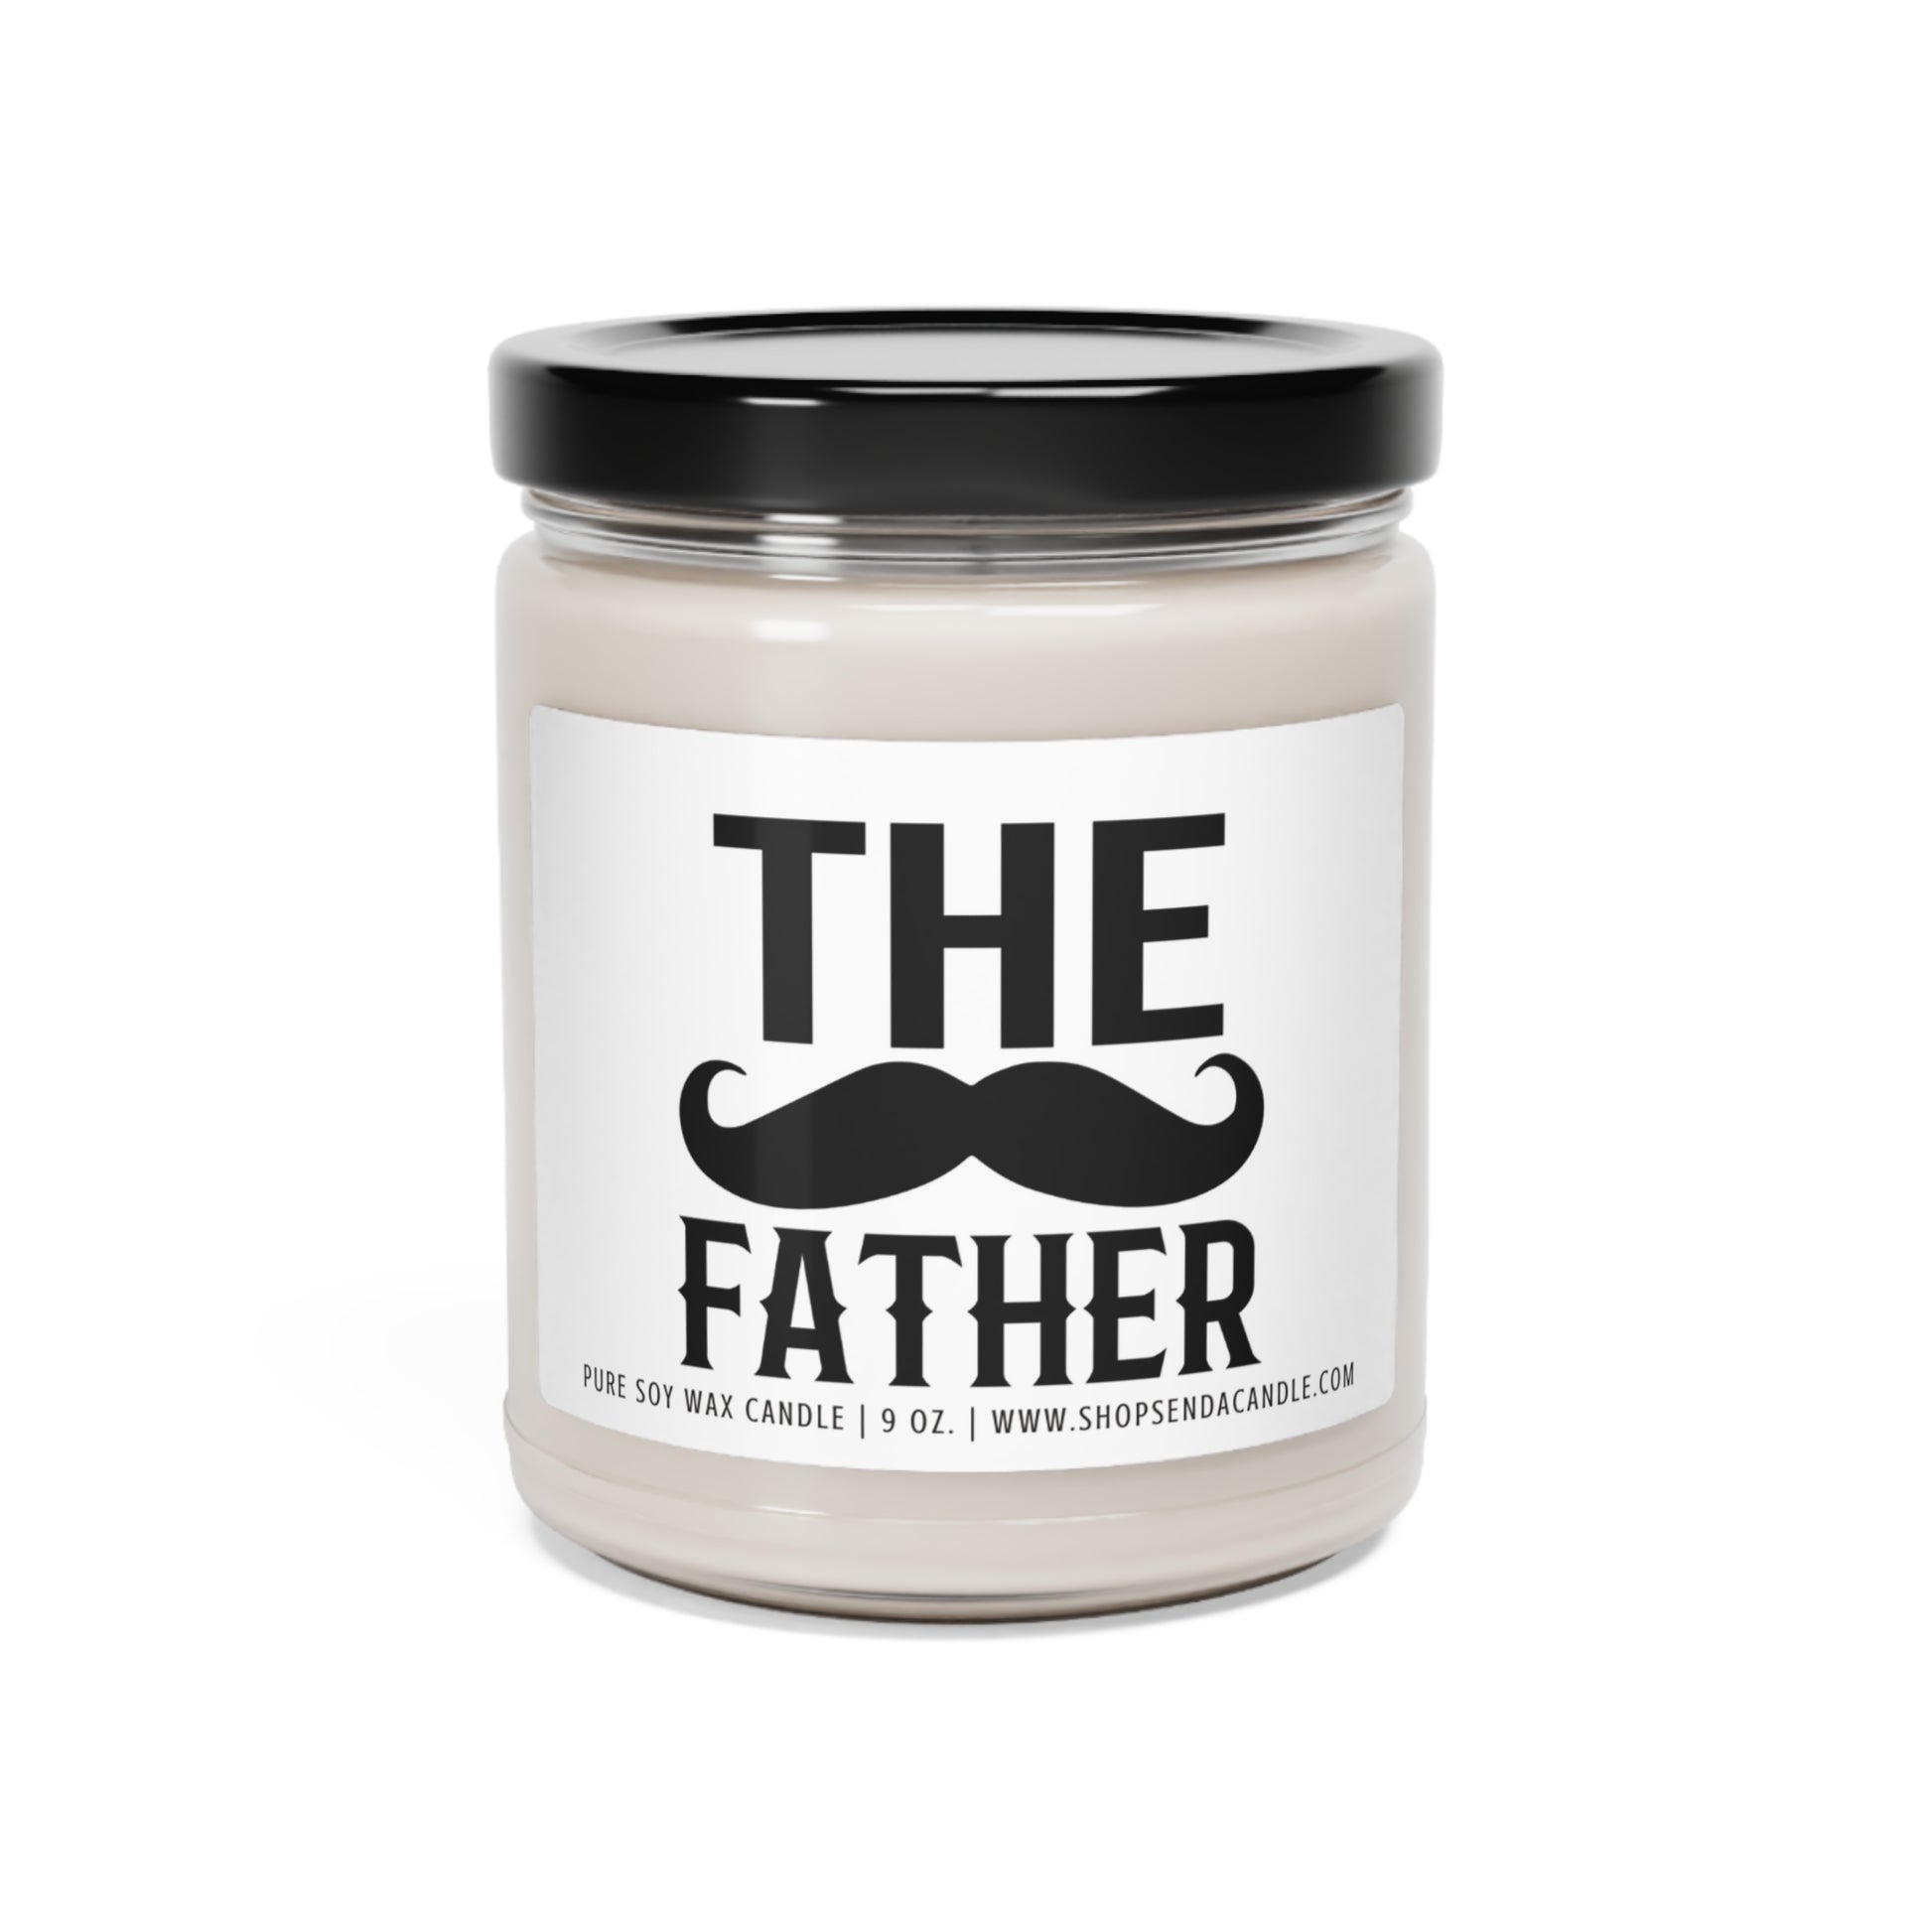 New Dad Gifts | Send A Candle